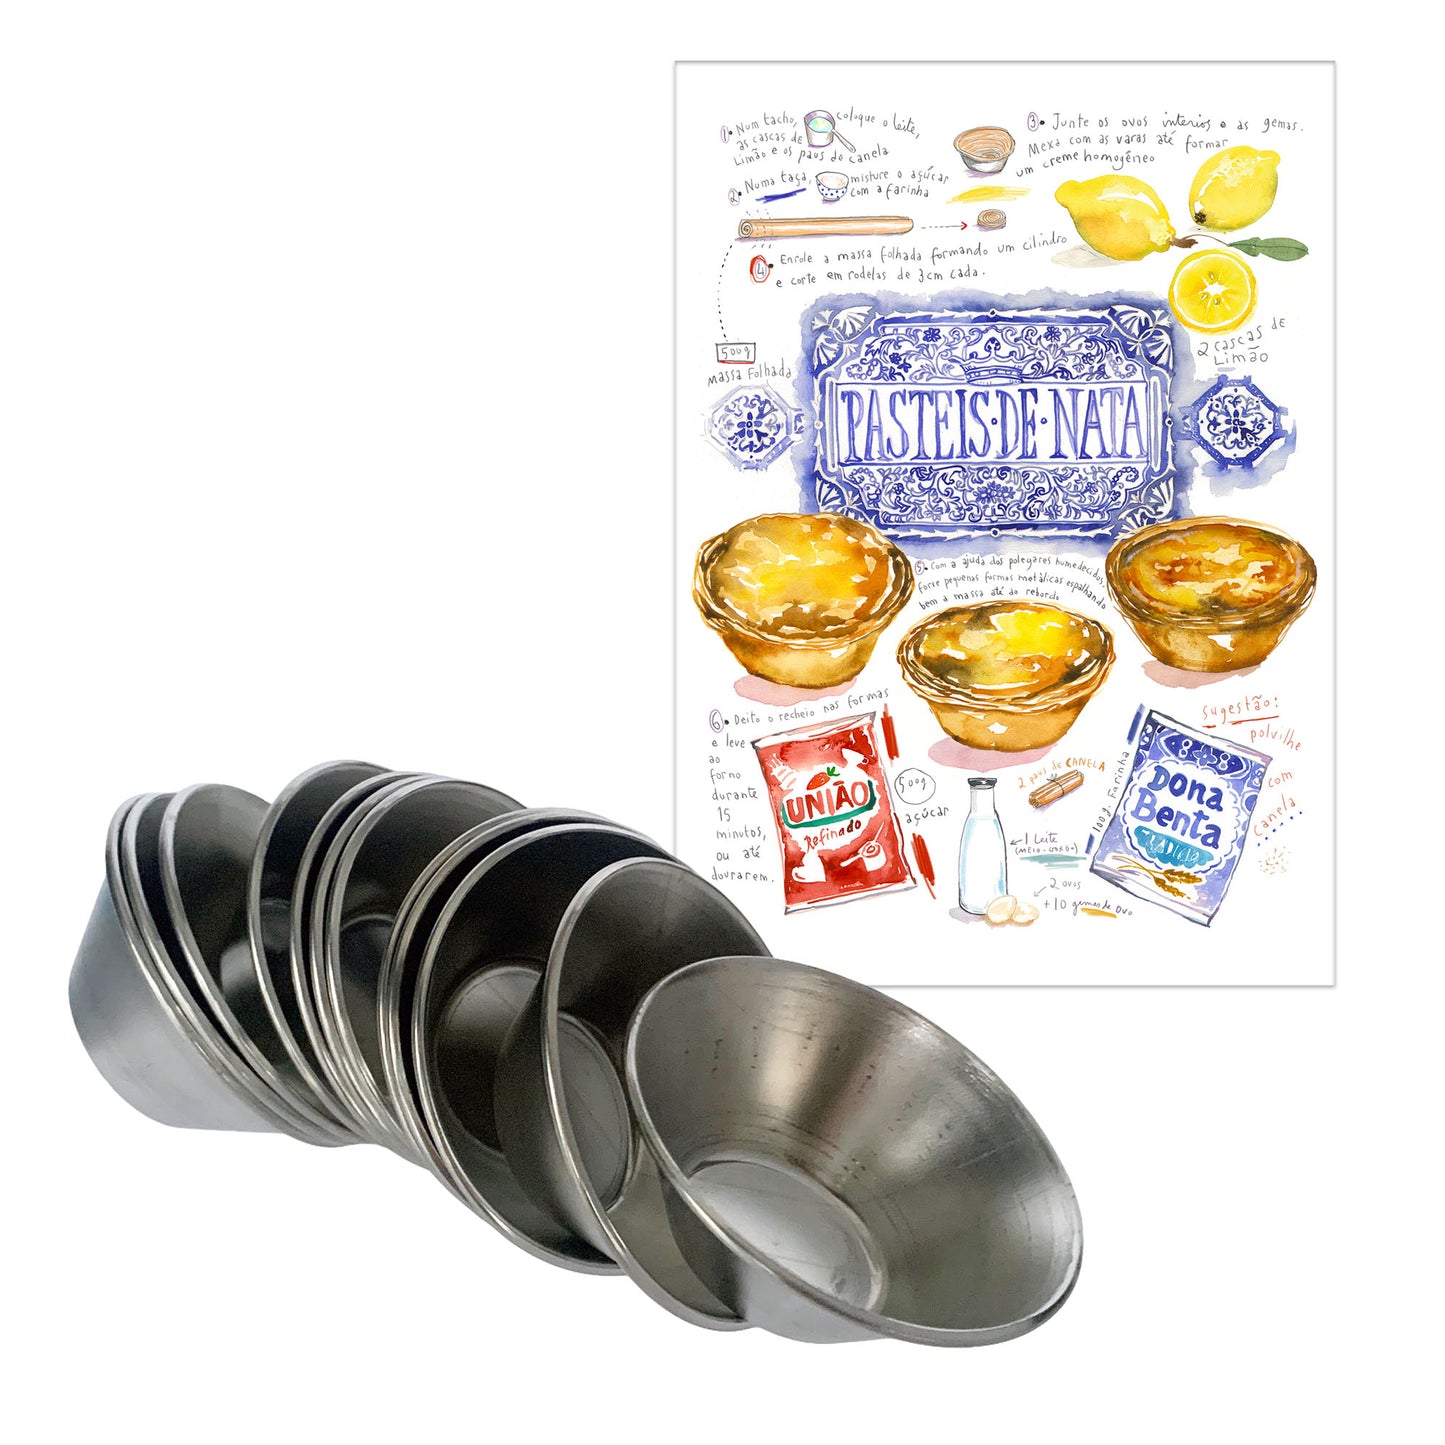 Pastel de Nata Tins (Egg Tart Tins) - Made in Portugal out of Galvanized Steel - Includes Pastéis de Nata Print Postcard and Downloadable Recipe - Set of 12